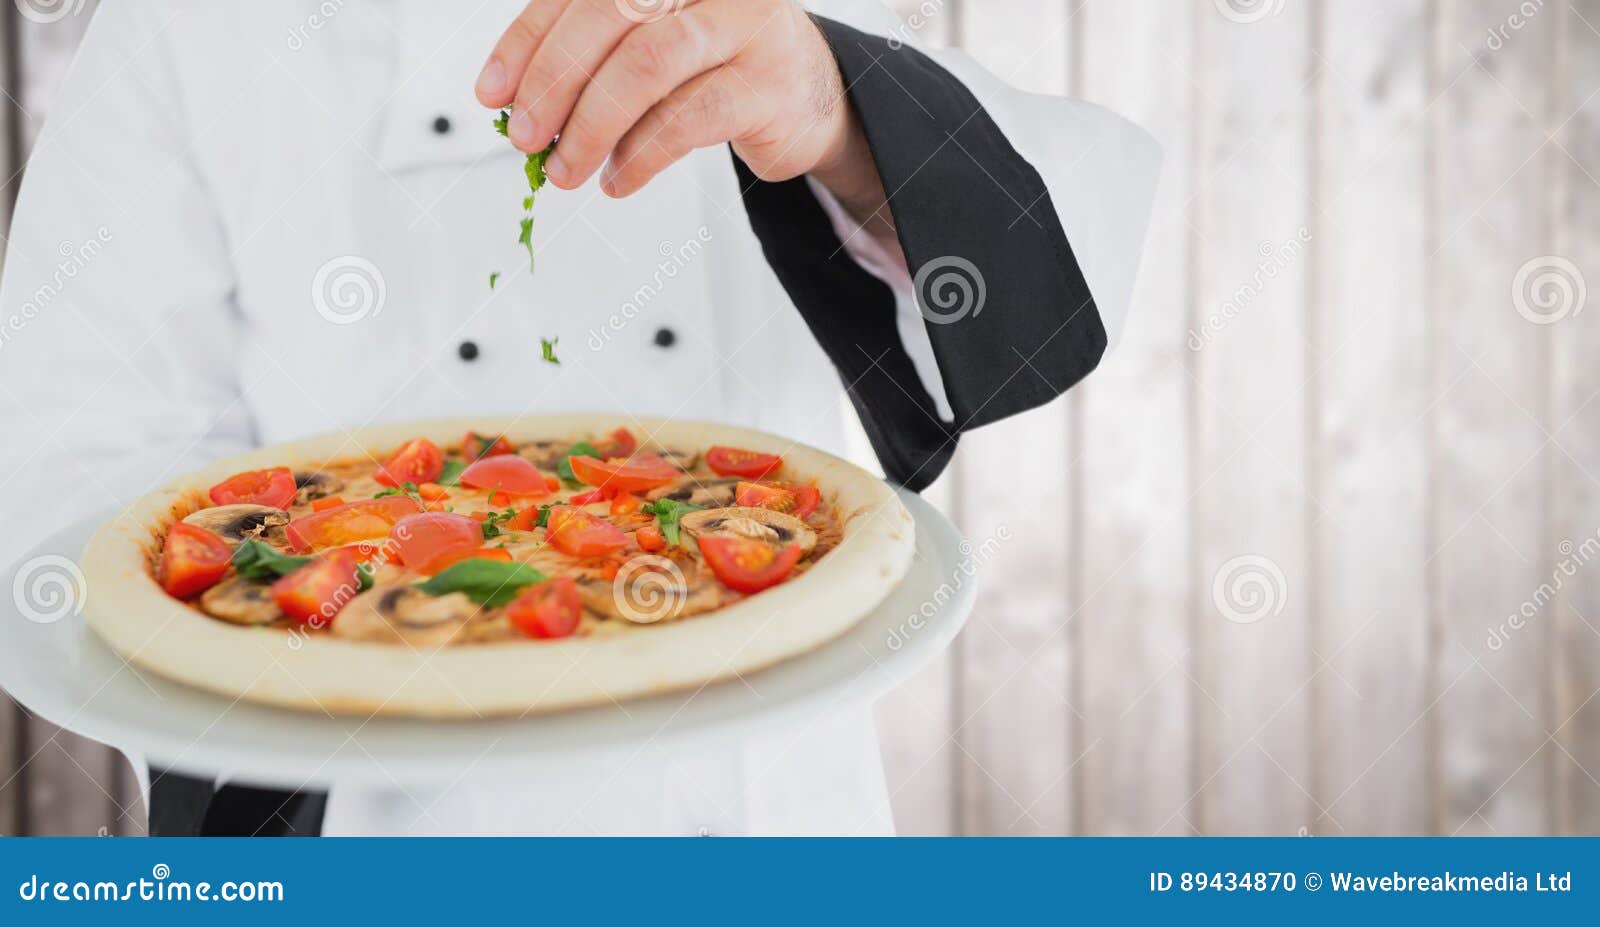 Chef Putting Herbs on Pizza Against Blurry Wood Panel Stock Photo ...